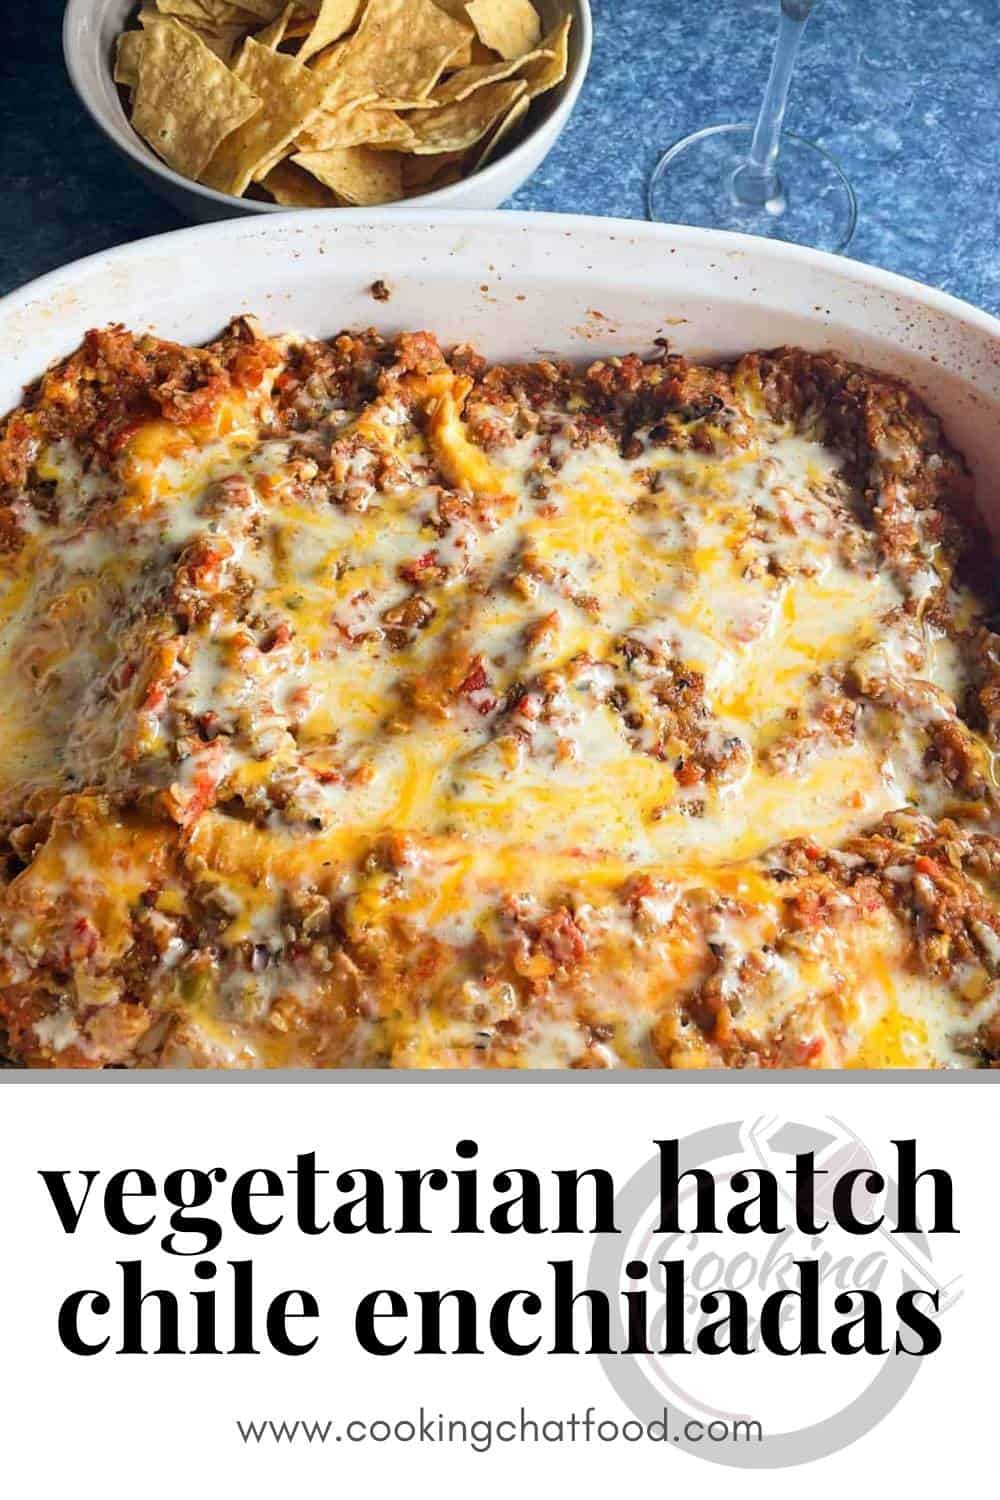 Hatch chile enhiladas in a baking dish, with melted cheese and sauce on top. Text underneath the food says "vegetarian hatch chile enchiladas".